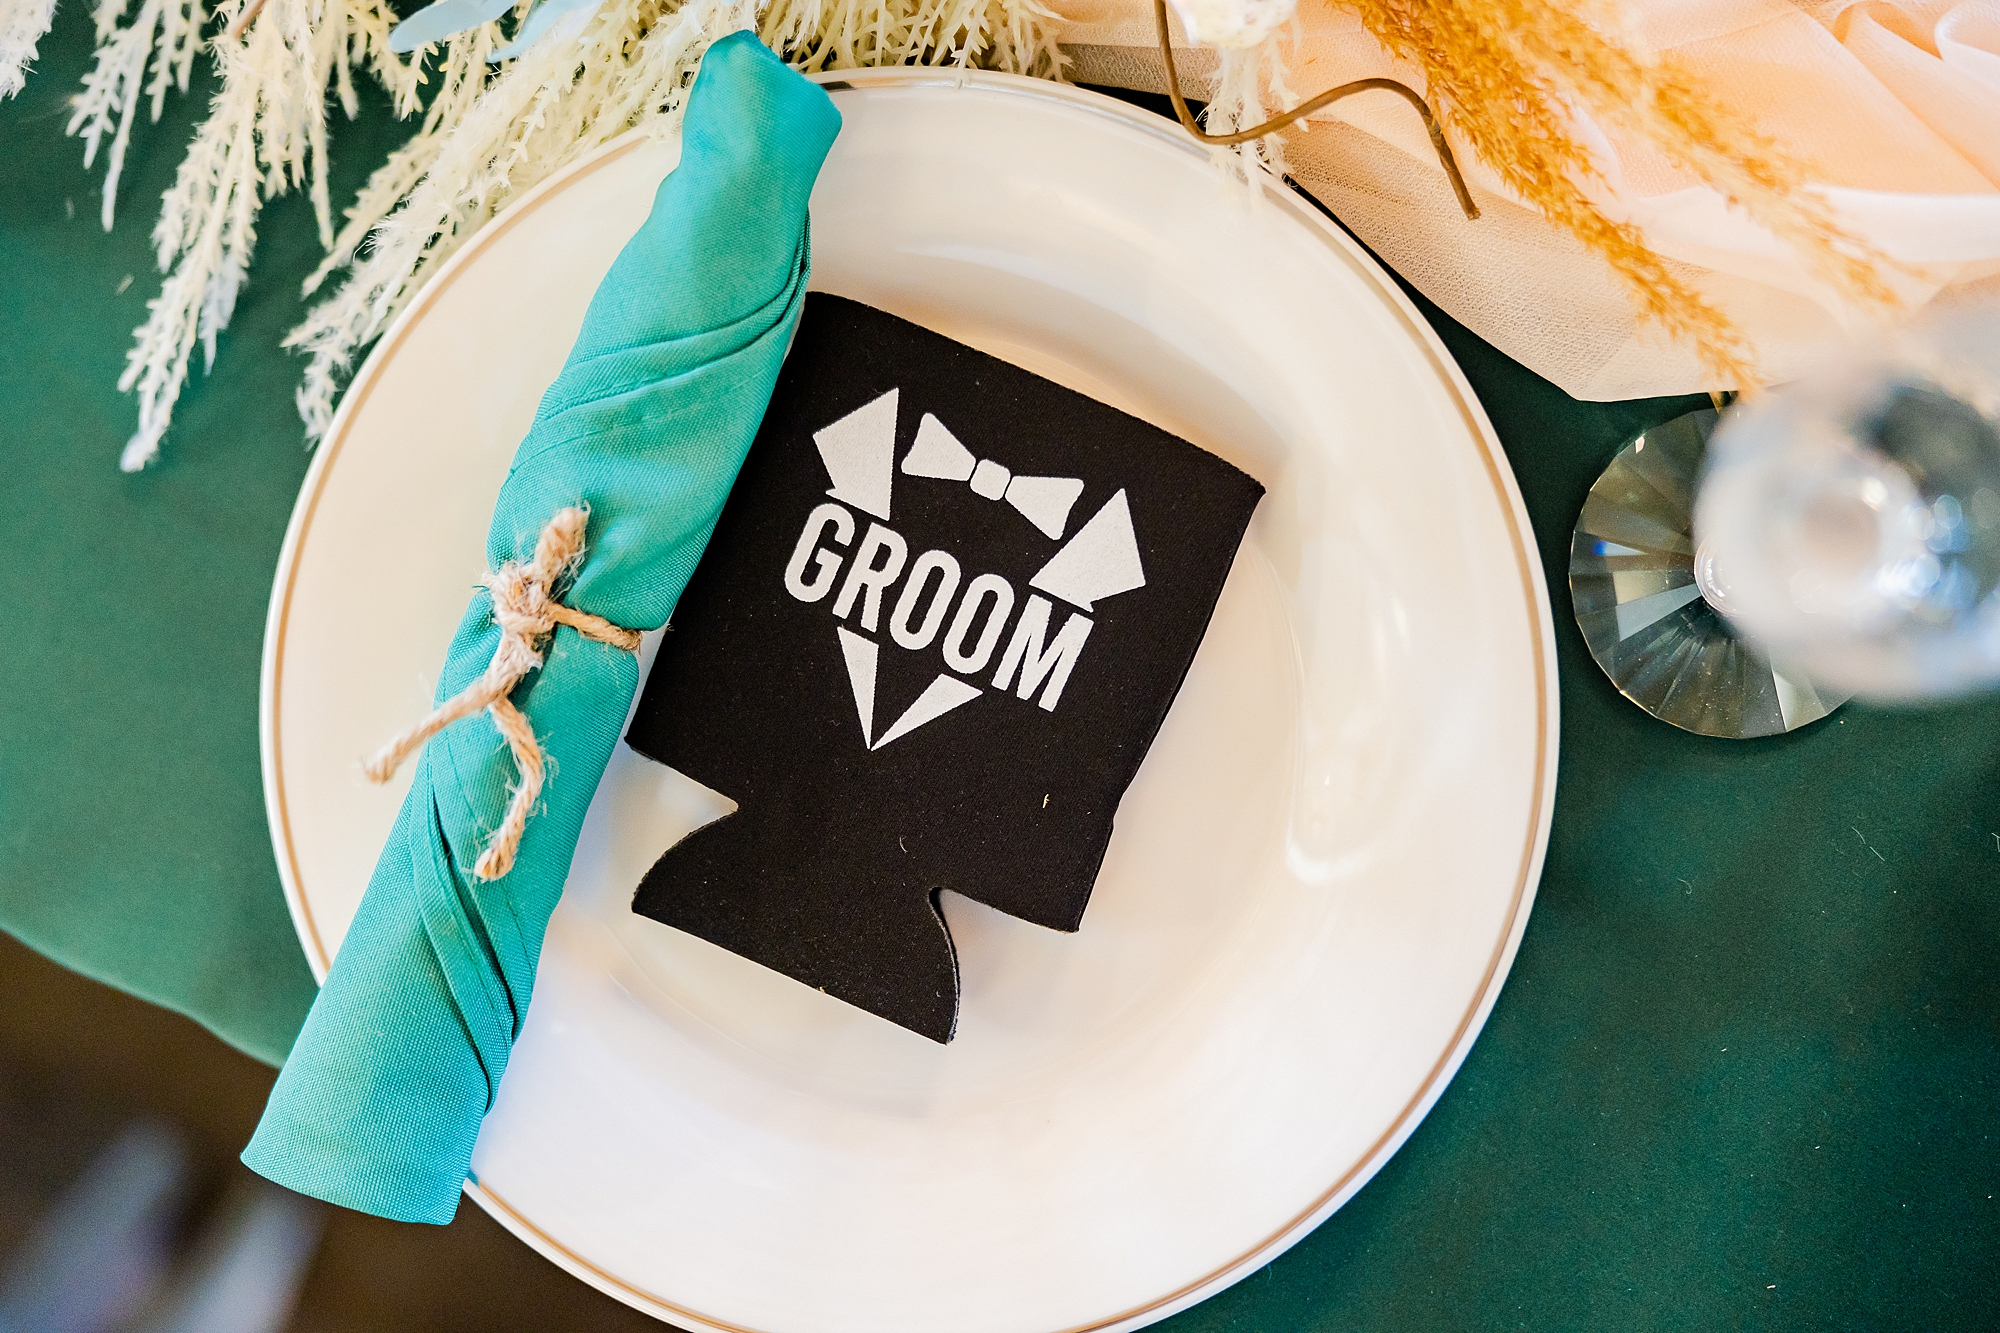 groom lace setting with teal napkin and groom koozie